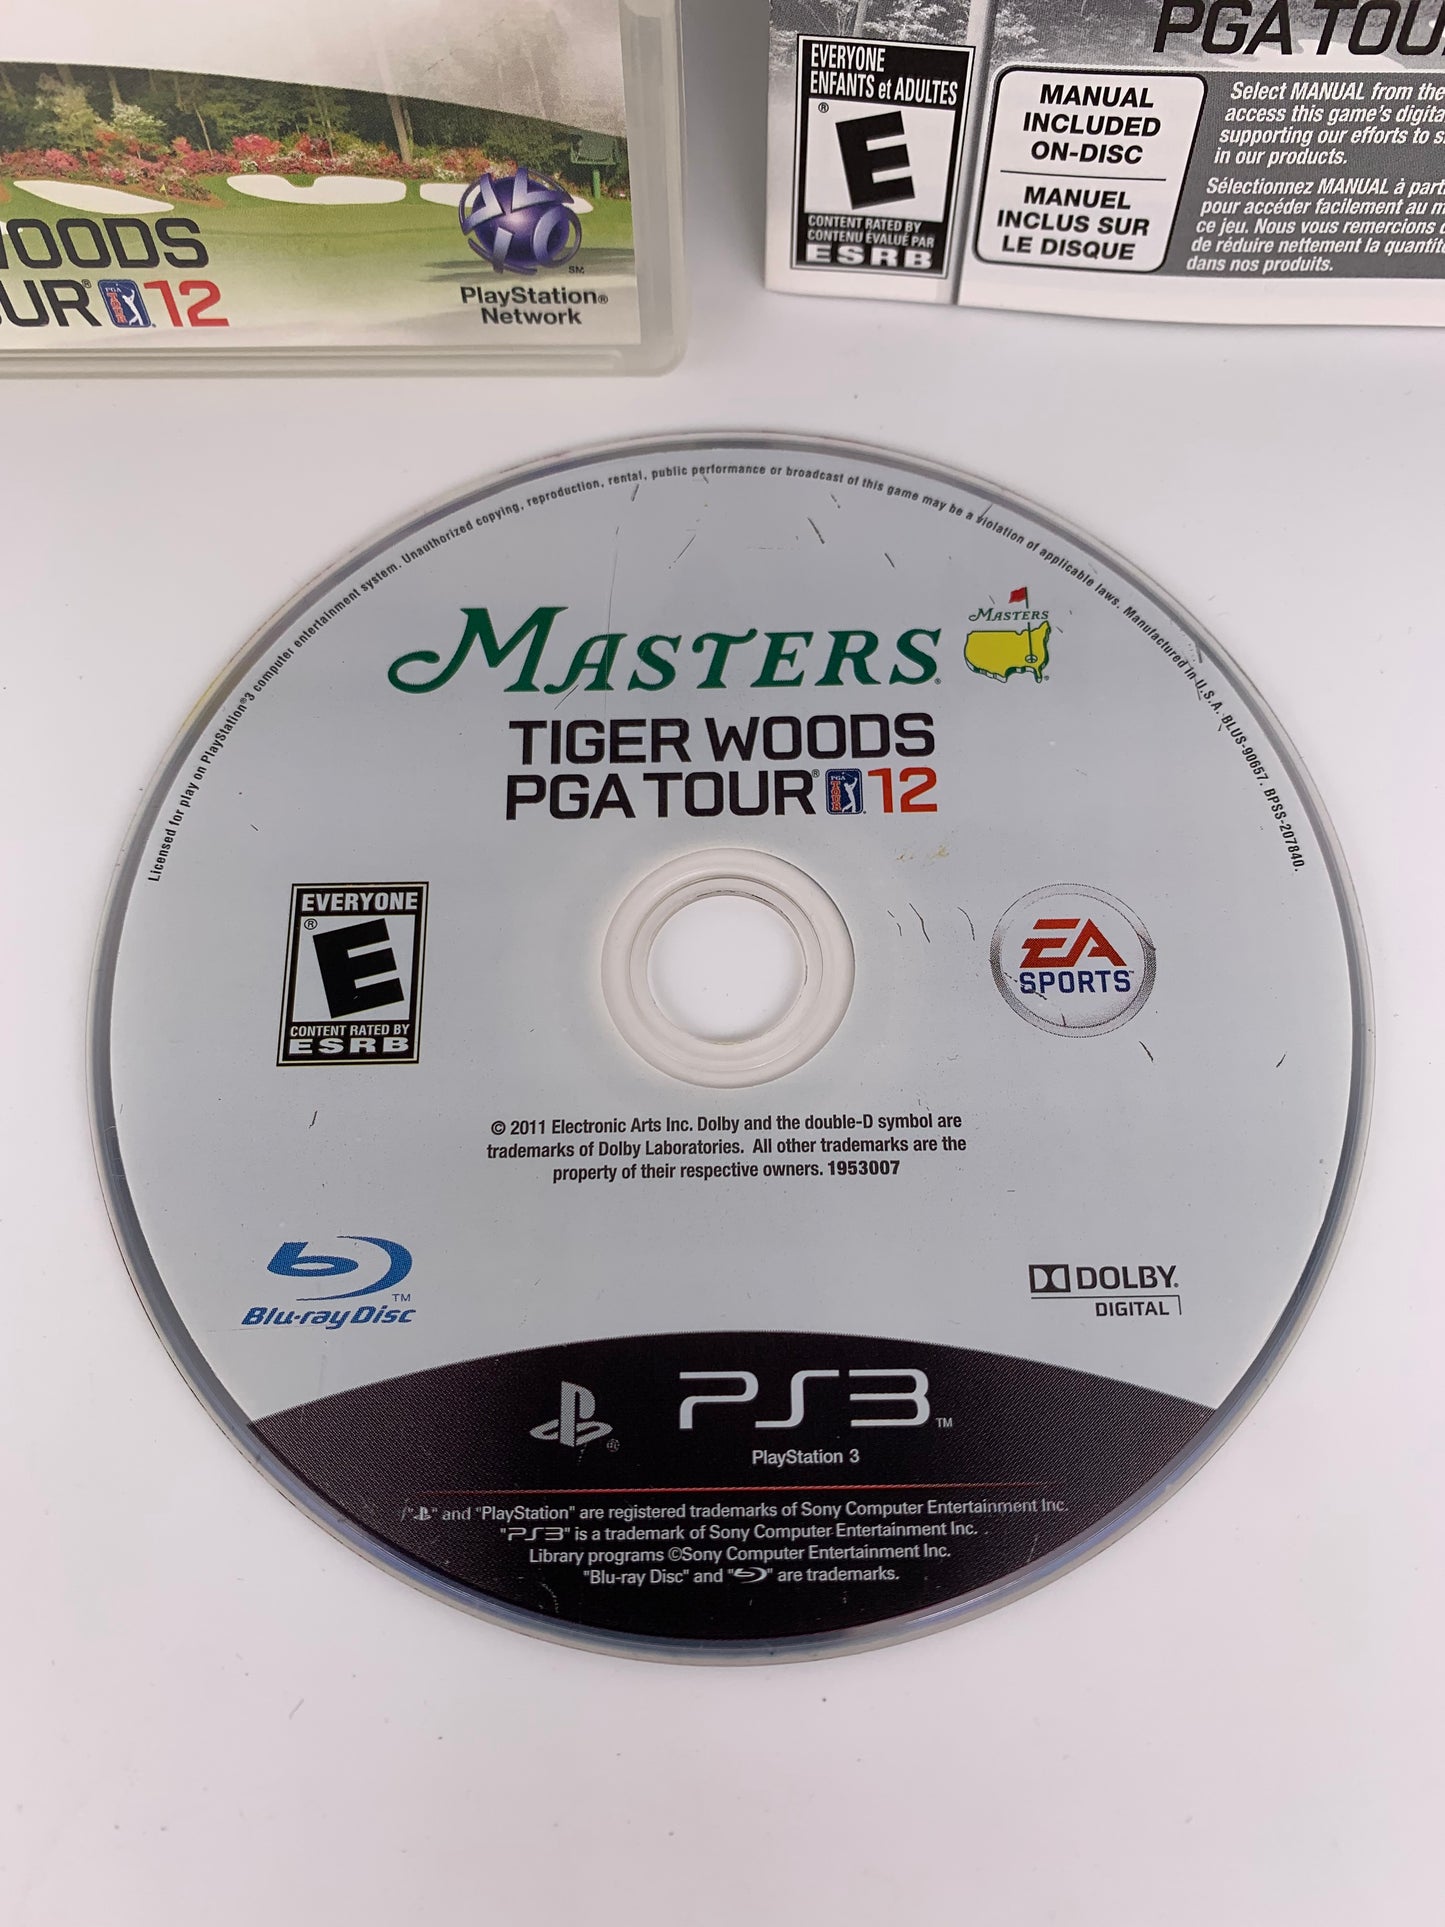 SONY PLAYSTATiON 3 [PS3] | TiGER WOODS PGA TOUR 12 MASTERS